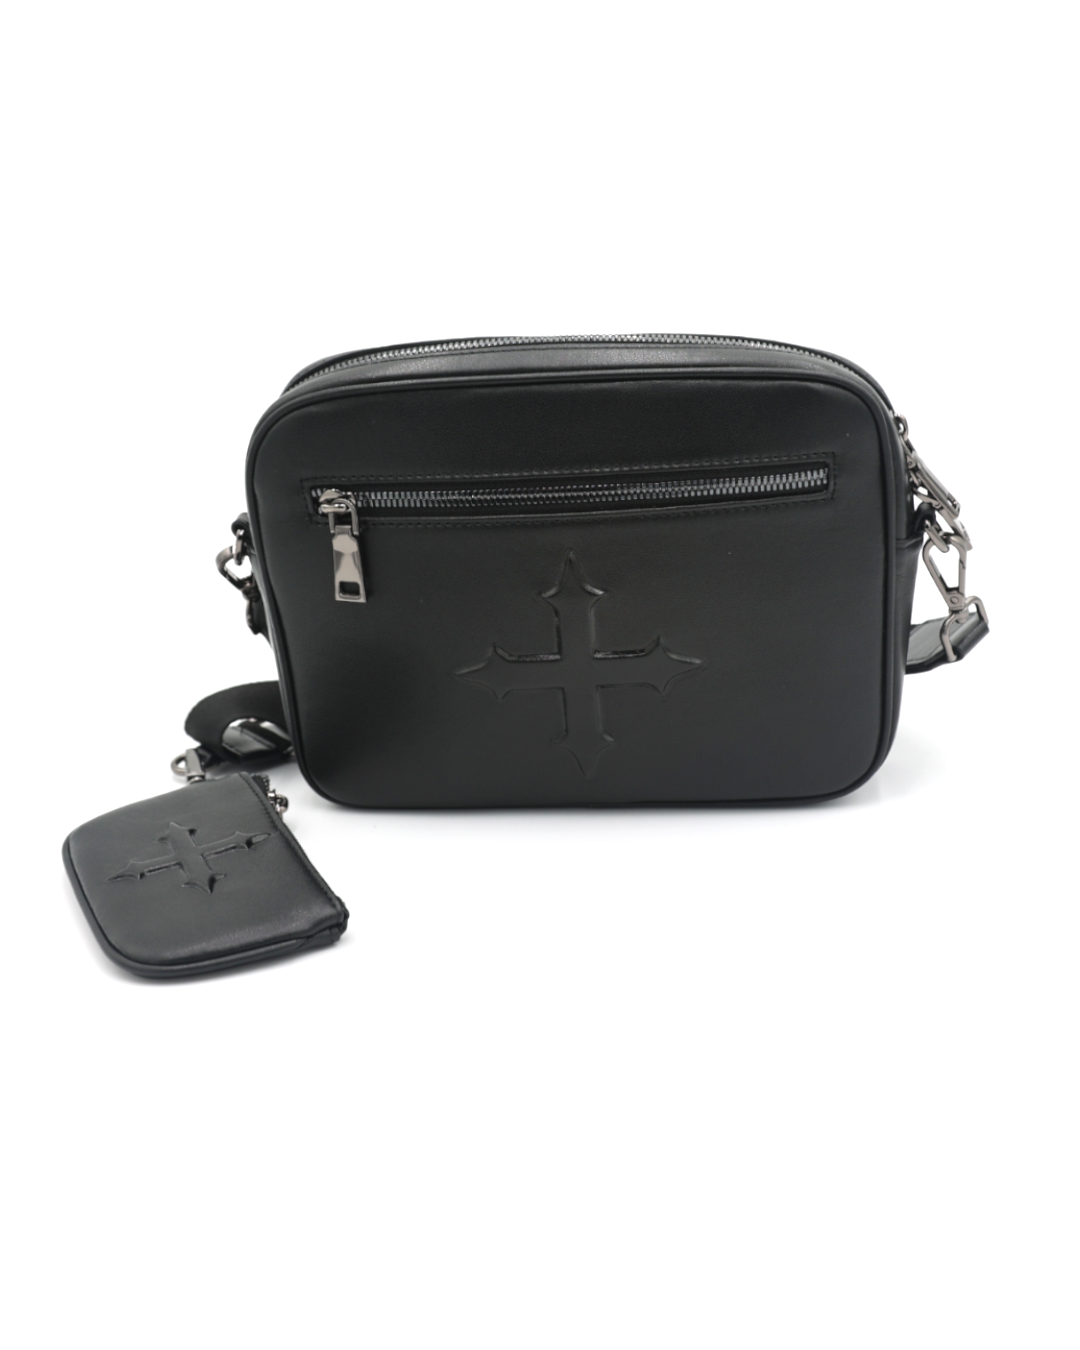 EVOL+VE 'FROM SIMPLE TO COMPLEX' LEATHER SIDE BAG BLACK